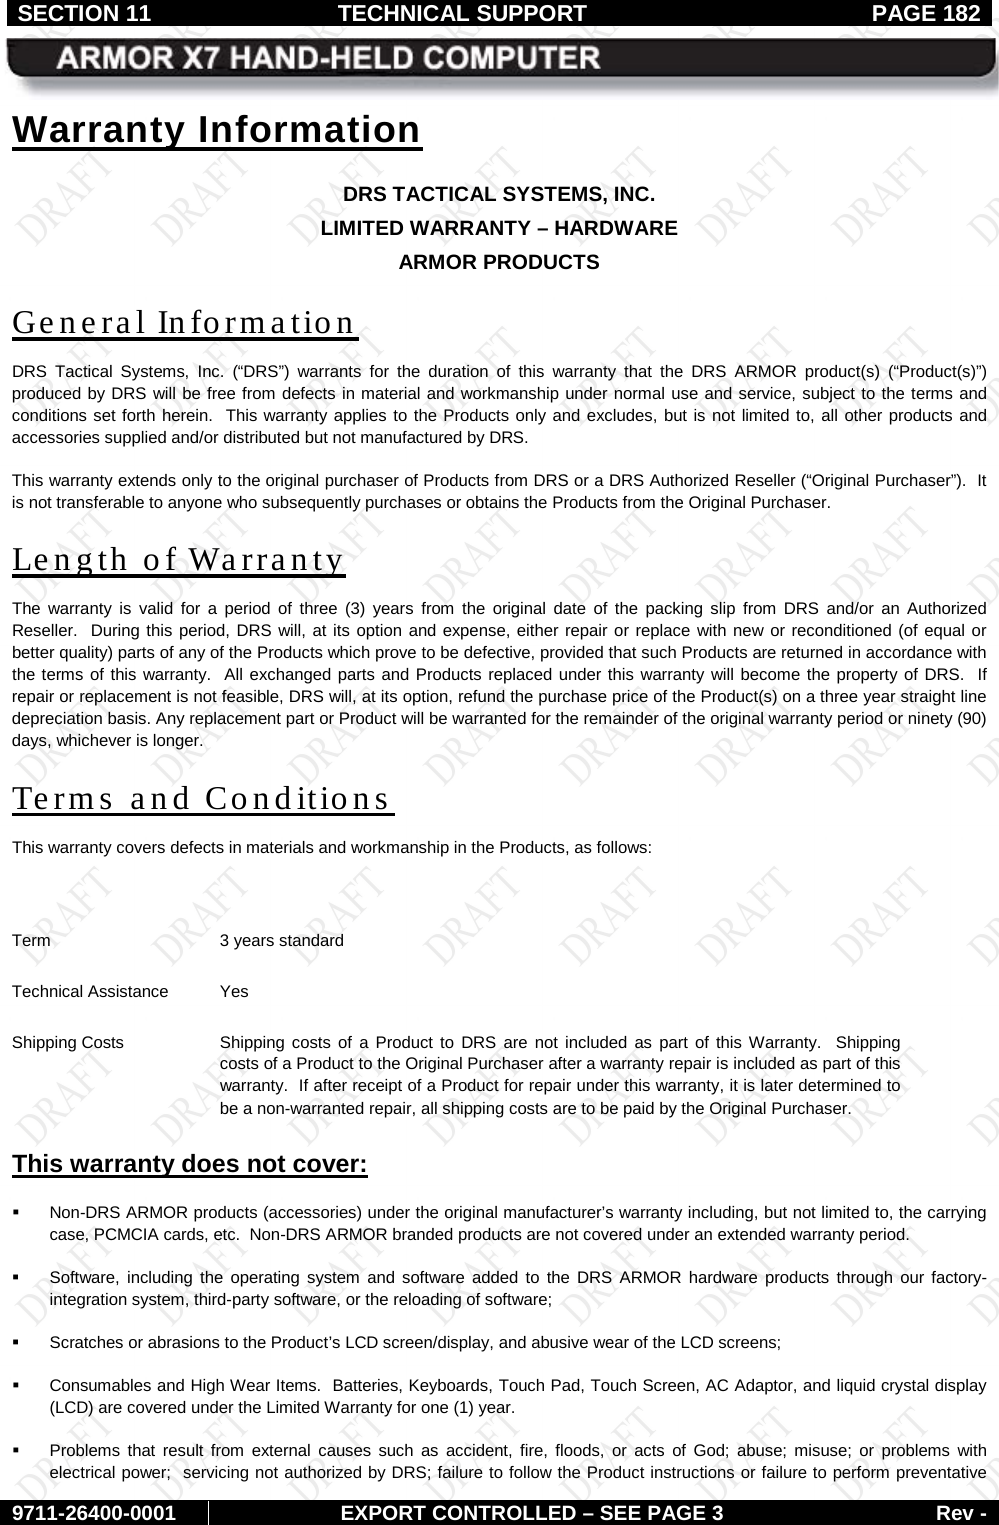 SECTION 11 TECHNICAL SUPPORT  PAGE 182     9711-26400-0001 EXPORT CONTROLLED – SEE PAGE 3 Rev - Warranty Information DRS TACTICAL SYSTEMS, INC. LIMITED WARRANTY – HARDWARE ARMOR PRODUCTS General Information DRS Tactical Systems, Inc. (“DRS”)  warrants for the duration of this warranty that the  DRS ARMOR product(s)  (“Product(s)”) produced by DRS will be free from defects in material and workmanship under normal use and service, subject to the terms and conditions set forth herein.  This warranty applies to the Products only and excludes, but is not limited to, all other products and accessories supplied and/or distributed but not manufactured by DRS.   This warranty extends only to the original purchaser of Products from DRS or a DRS Authorized Reseller (“Original Purchaser”).  It is not transferable to anyone who subsequently purchases or obtains the Products from the Original Purchaser. Length of Warranty The warranty is valid for a period of three (3) years  from the original date of the packing slip from DRS and/or an Authorized Reseller.  During this period, DRS will, at its option and expense, either repair or replace with new or reconditioned (of equal or better quality) parts of any of the Products which prove to be defective, provided that such Products are returned in accordance with the terms of this warranty.  All exchanged parts and Products replaced under this warranty will become the property of DRS.  If repair or replacement is not feasible, DRS will, at its option, refund the purchase price of the Product(s) on a three year straight line depreciation basis. Any replacement part or Product will be warranted for the remainder of the original warranty period or ninety (90) days, whichever is longer. Terms  and Conditions This warranty covers defects in materials and workmanship in the Products, as follows:  Term 3 years standard Technical Assistance Yes Shipping Costs Shipping costs of a Product to DRS are not included as part of this Warranty.  Shipping costs of a Product to the Original Purchaser after a warranty repair is included as part of this warranty.  If after receipt of a Product for repair under this warranty, it is later determined to be a non-warranted repair, all shipping costs are to be paid by the Original Purchaser. This warranty does not cover:   Non-DRS ARMOR products (accessories) under the original manufacturer’s warranty including, but not limited to, the carrying case, PCMCIA cards, etc.  Non-DRS ARMOR branded products are not covered under an extended warranty period.  Software, including the operating system and software added to the DRS ARMOR hardware products through our factory-integration system, third-party software, or the reloading of software;  Scratches or abrasions to the Product’s LCD screen/display, and abusive wear of the LCD screens;  Consumables and High Wear Items.  Batteries, Keyboards, Touch Pad, Touch Screen, AC Adaptor, and liquid crystal display (LCD) are covered under the Limited Warranty for one (1) year.   Problems that result from external causes such as accident, fire, floods, or acts of God; abuse; misuse; or problems with electrical power;  servicing not authorized by DRS; failure to follow the Product instructions or failure to perform preventative 